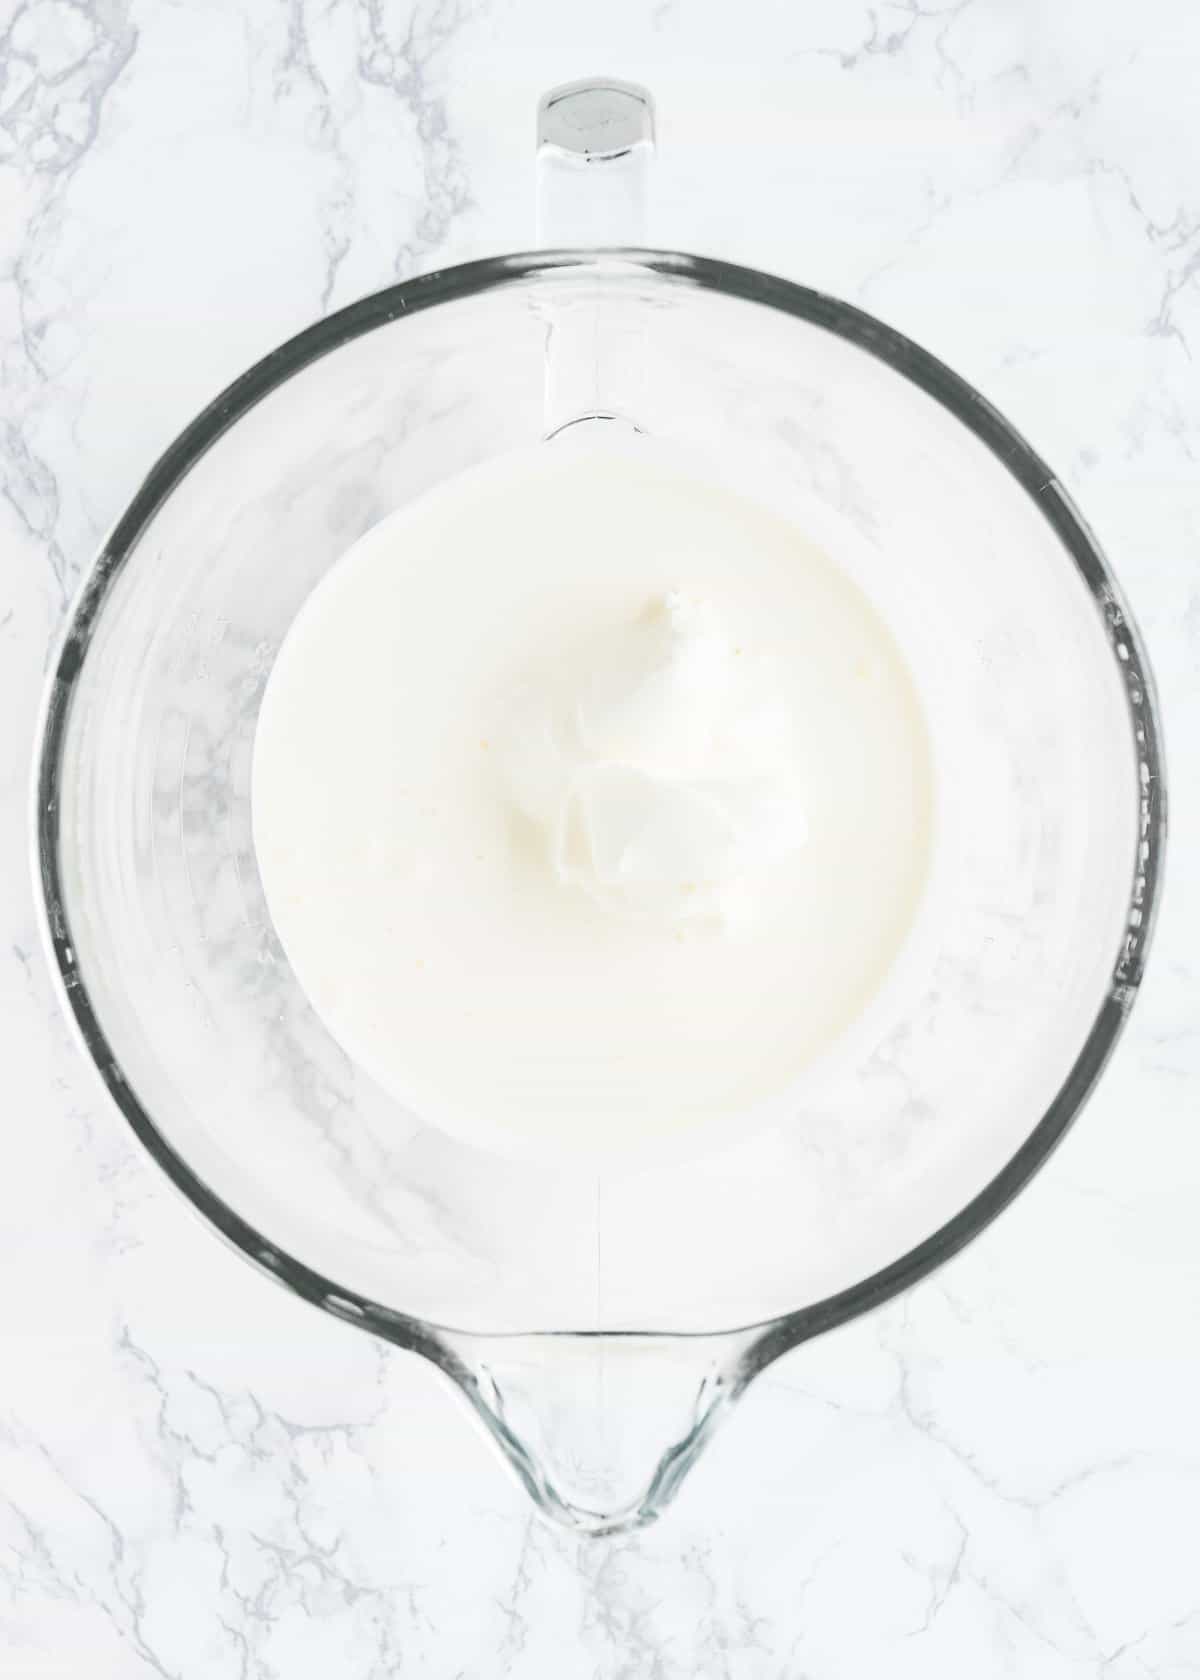 cream cheese and whipped cream in a glass bowl.